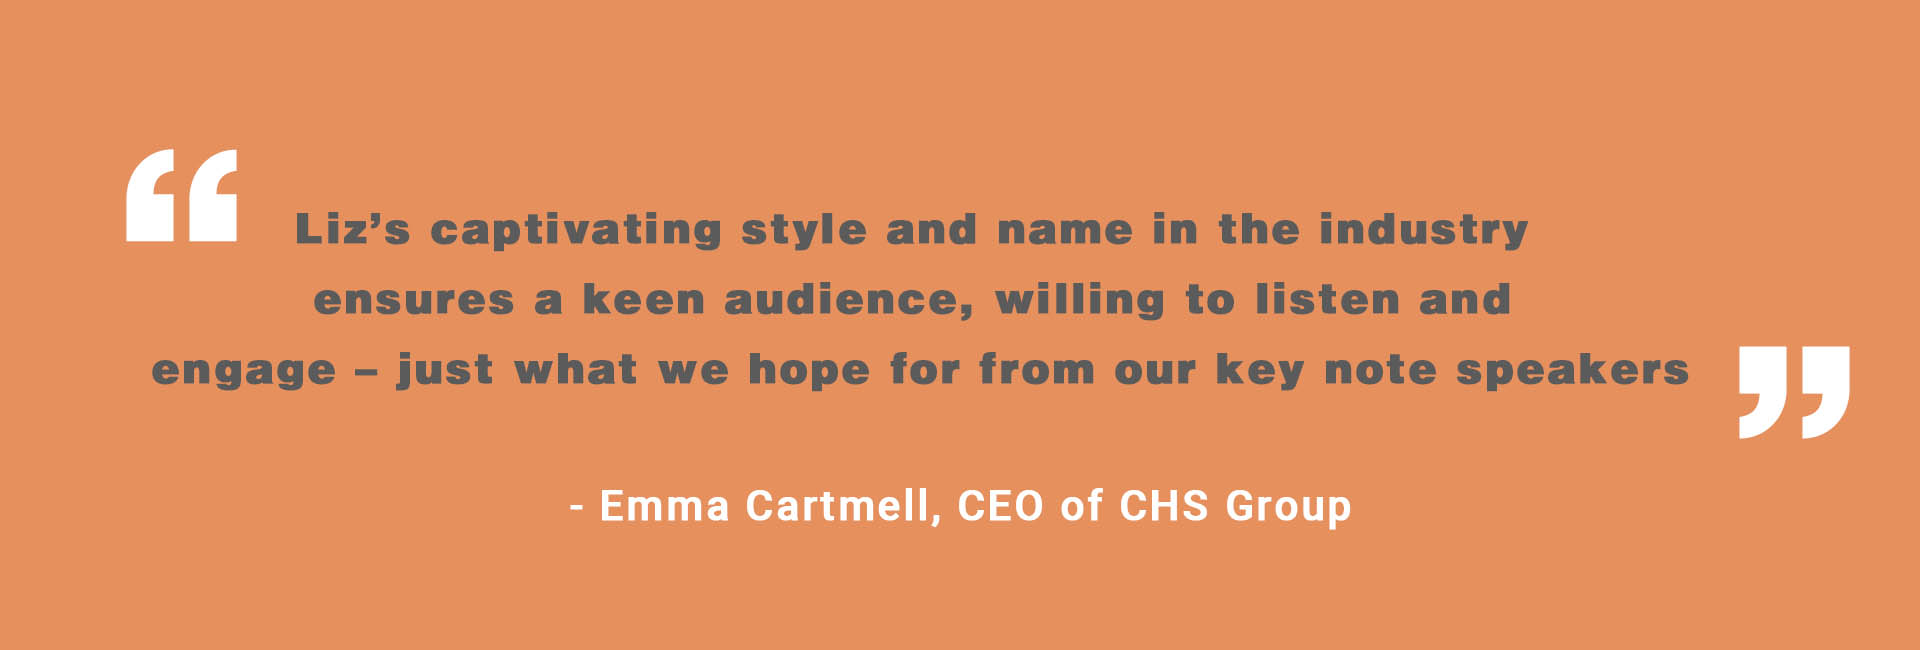 Emma Cartmell, CEO of CHS Group copy